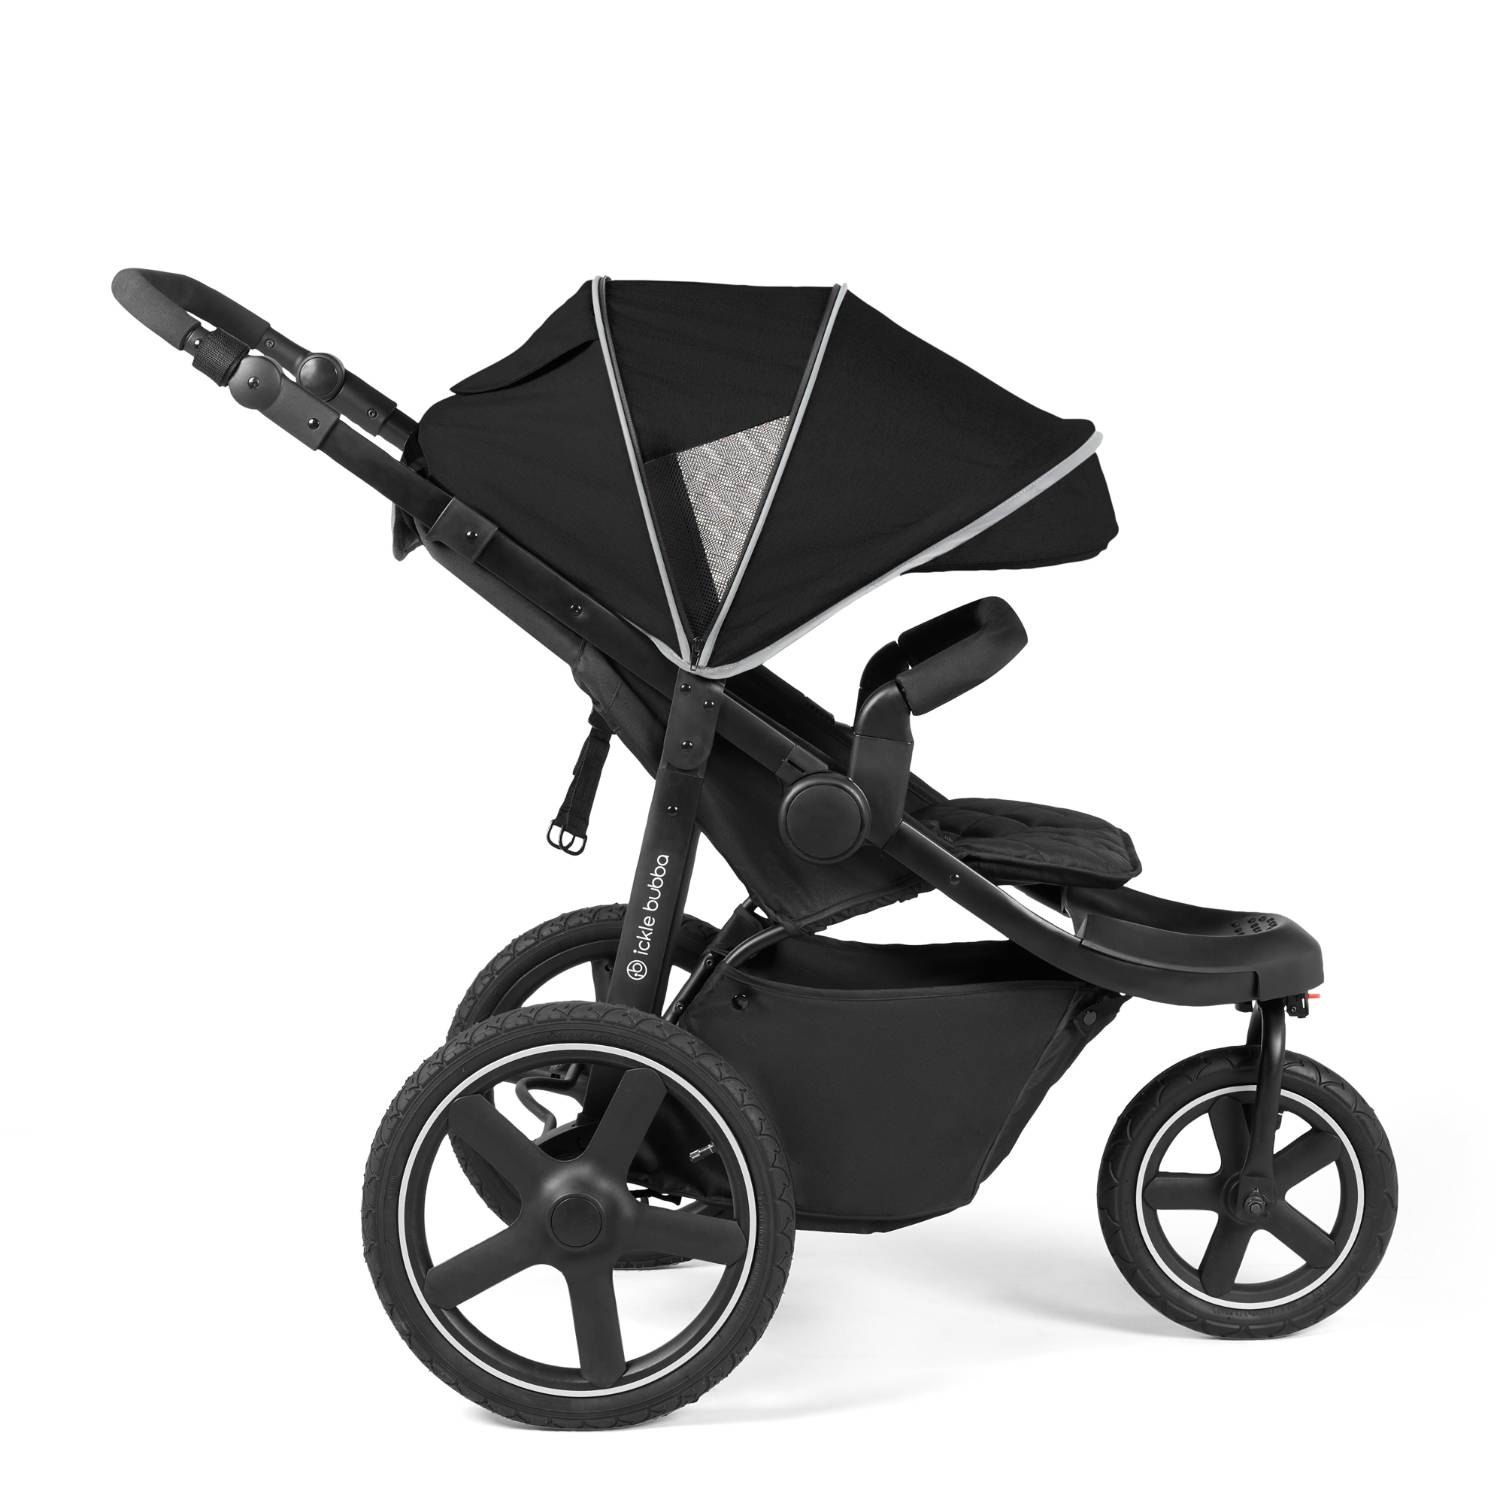 Side view of Ickle Bubba Venus Prime Jogger Stroller in Black colour with expanded hood